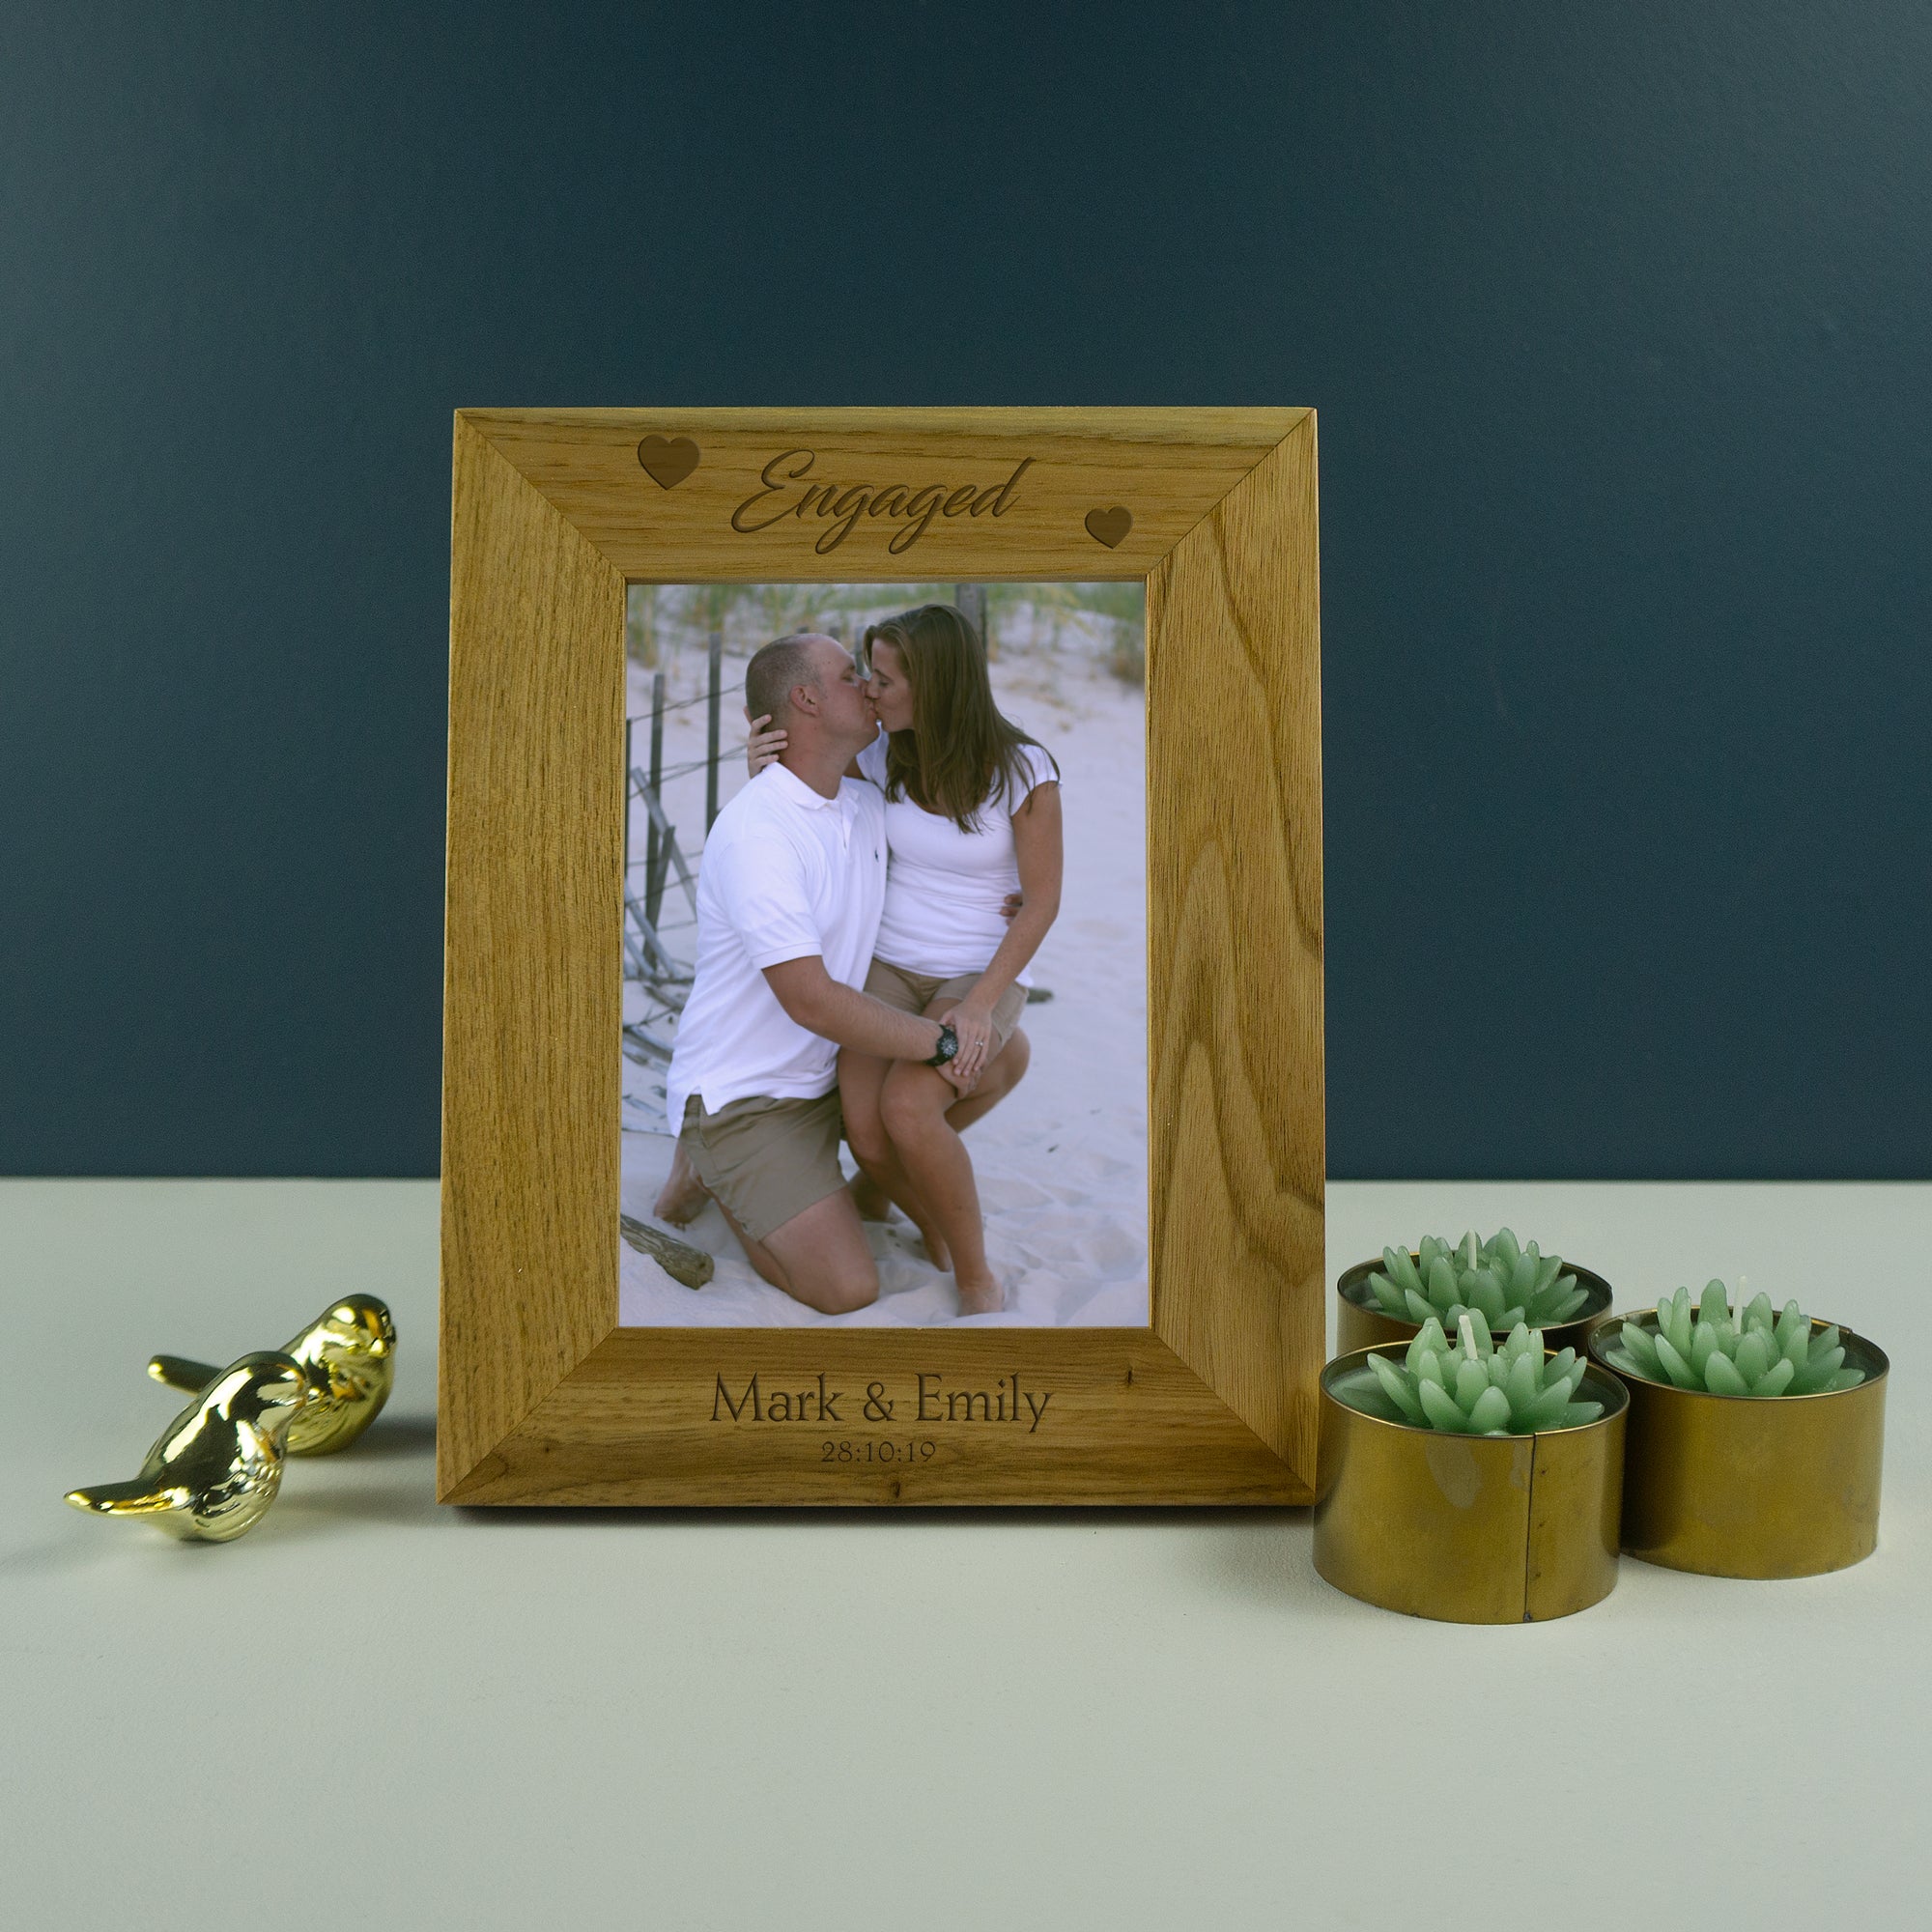 Engagement wooden photo frame